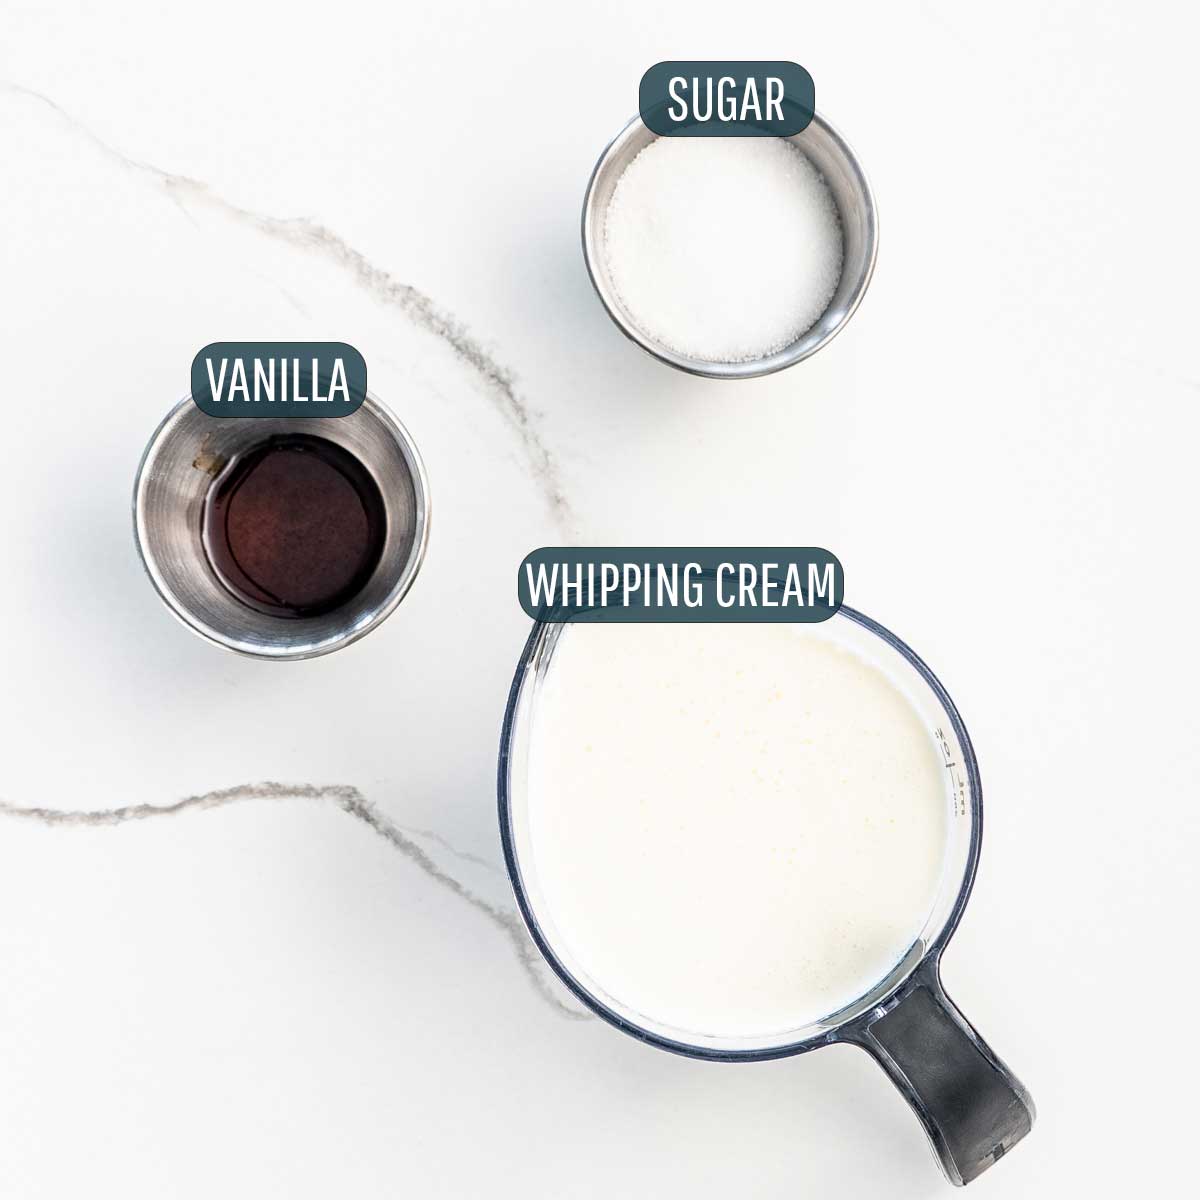 ingredients needed to make vanilla whipped cream.